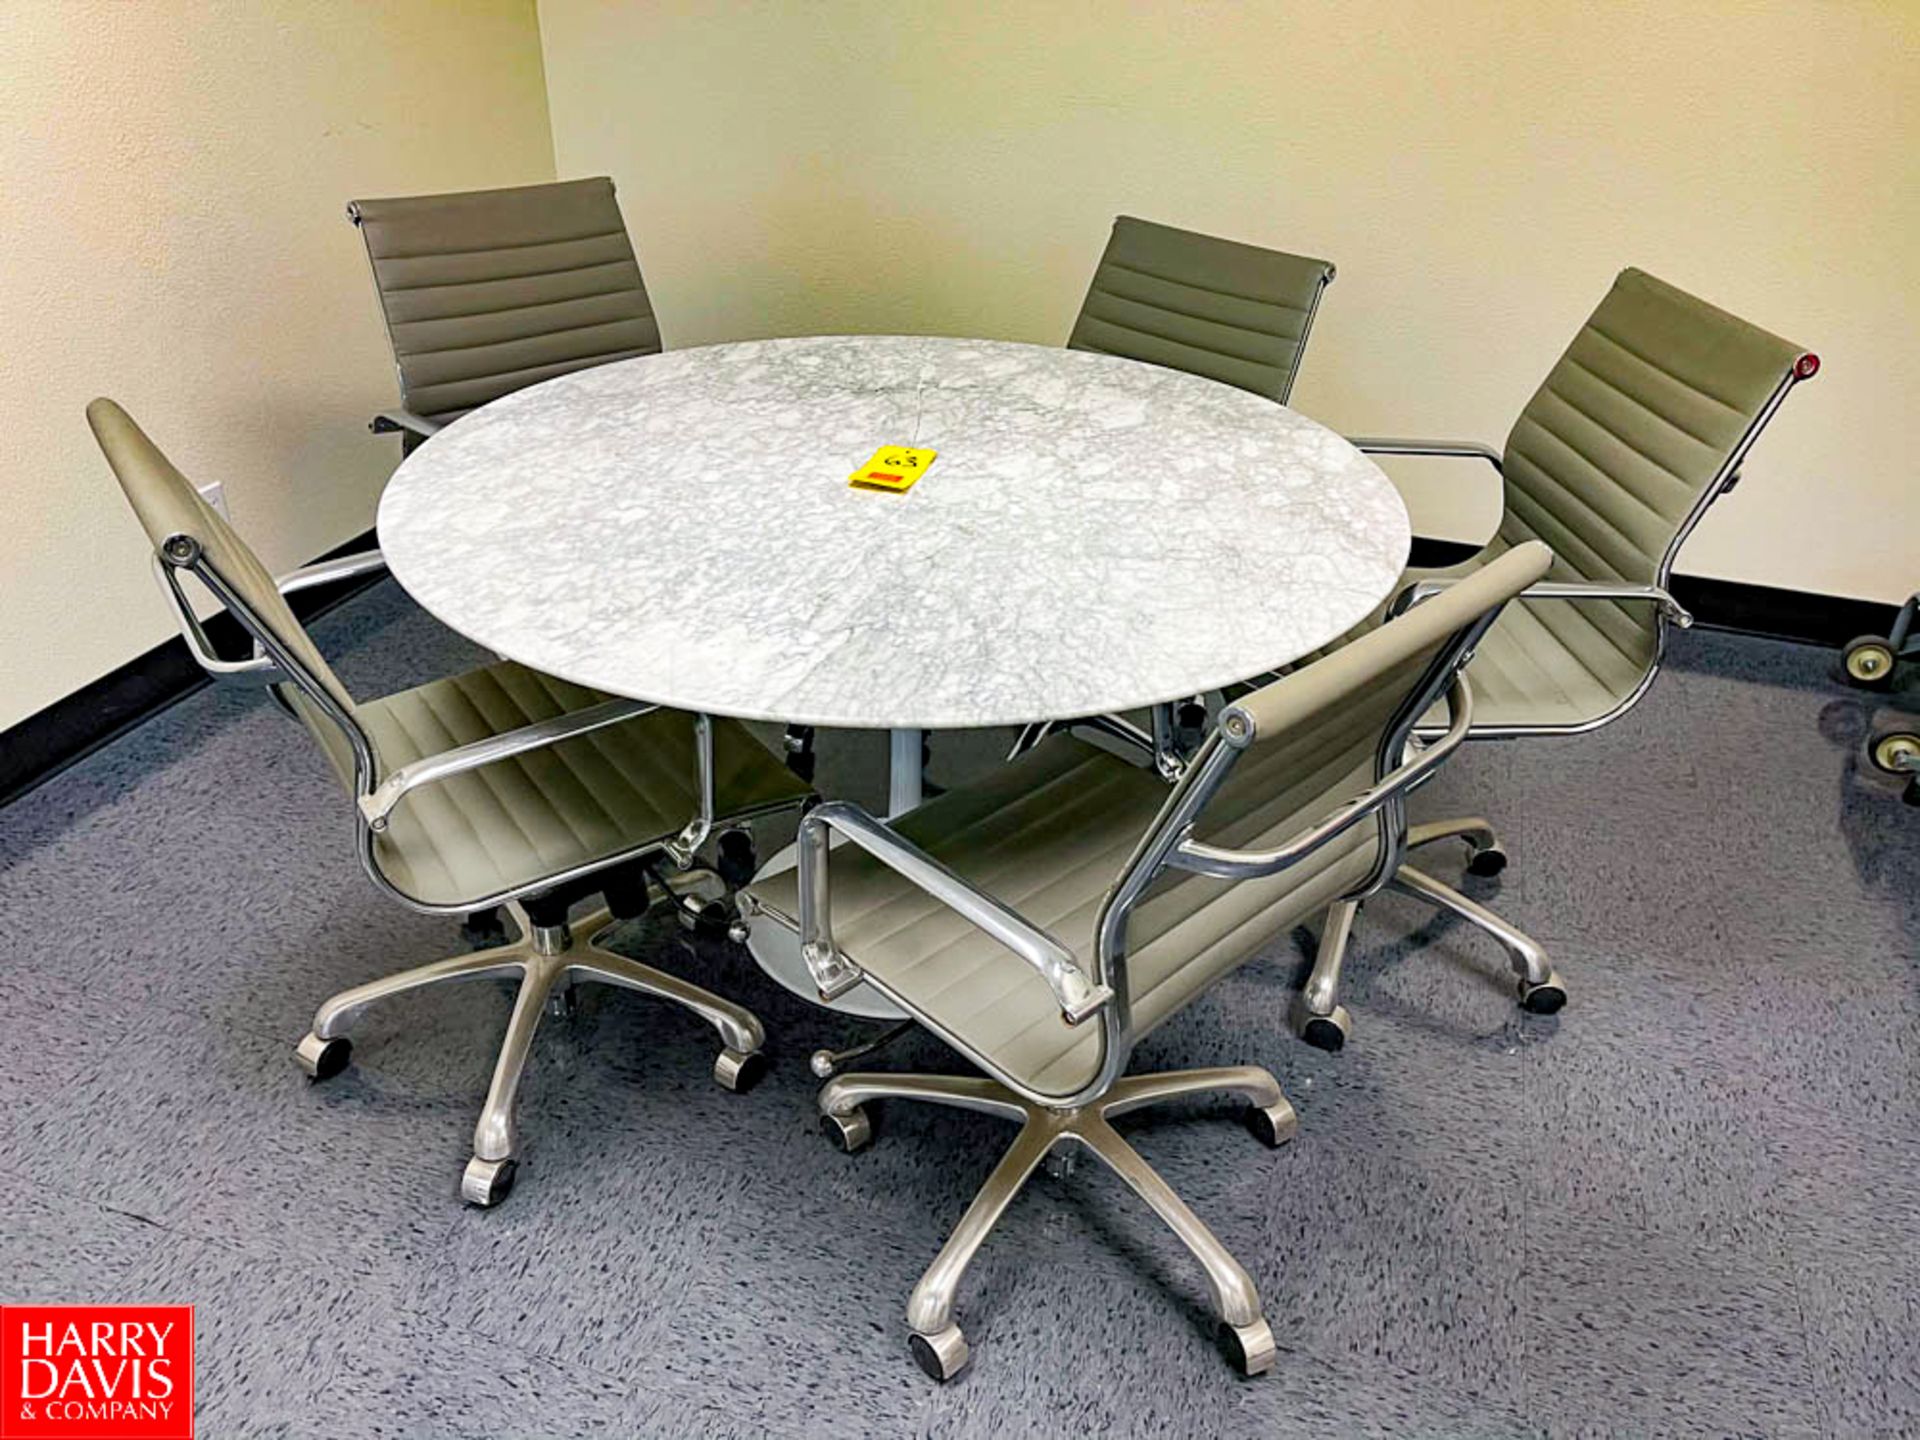 52"" Marble-Top Round Table with (5) Leather Chairs on Casters. Rigging Fee: $100